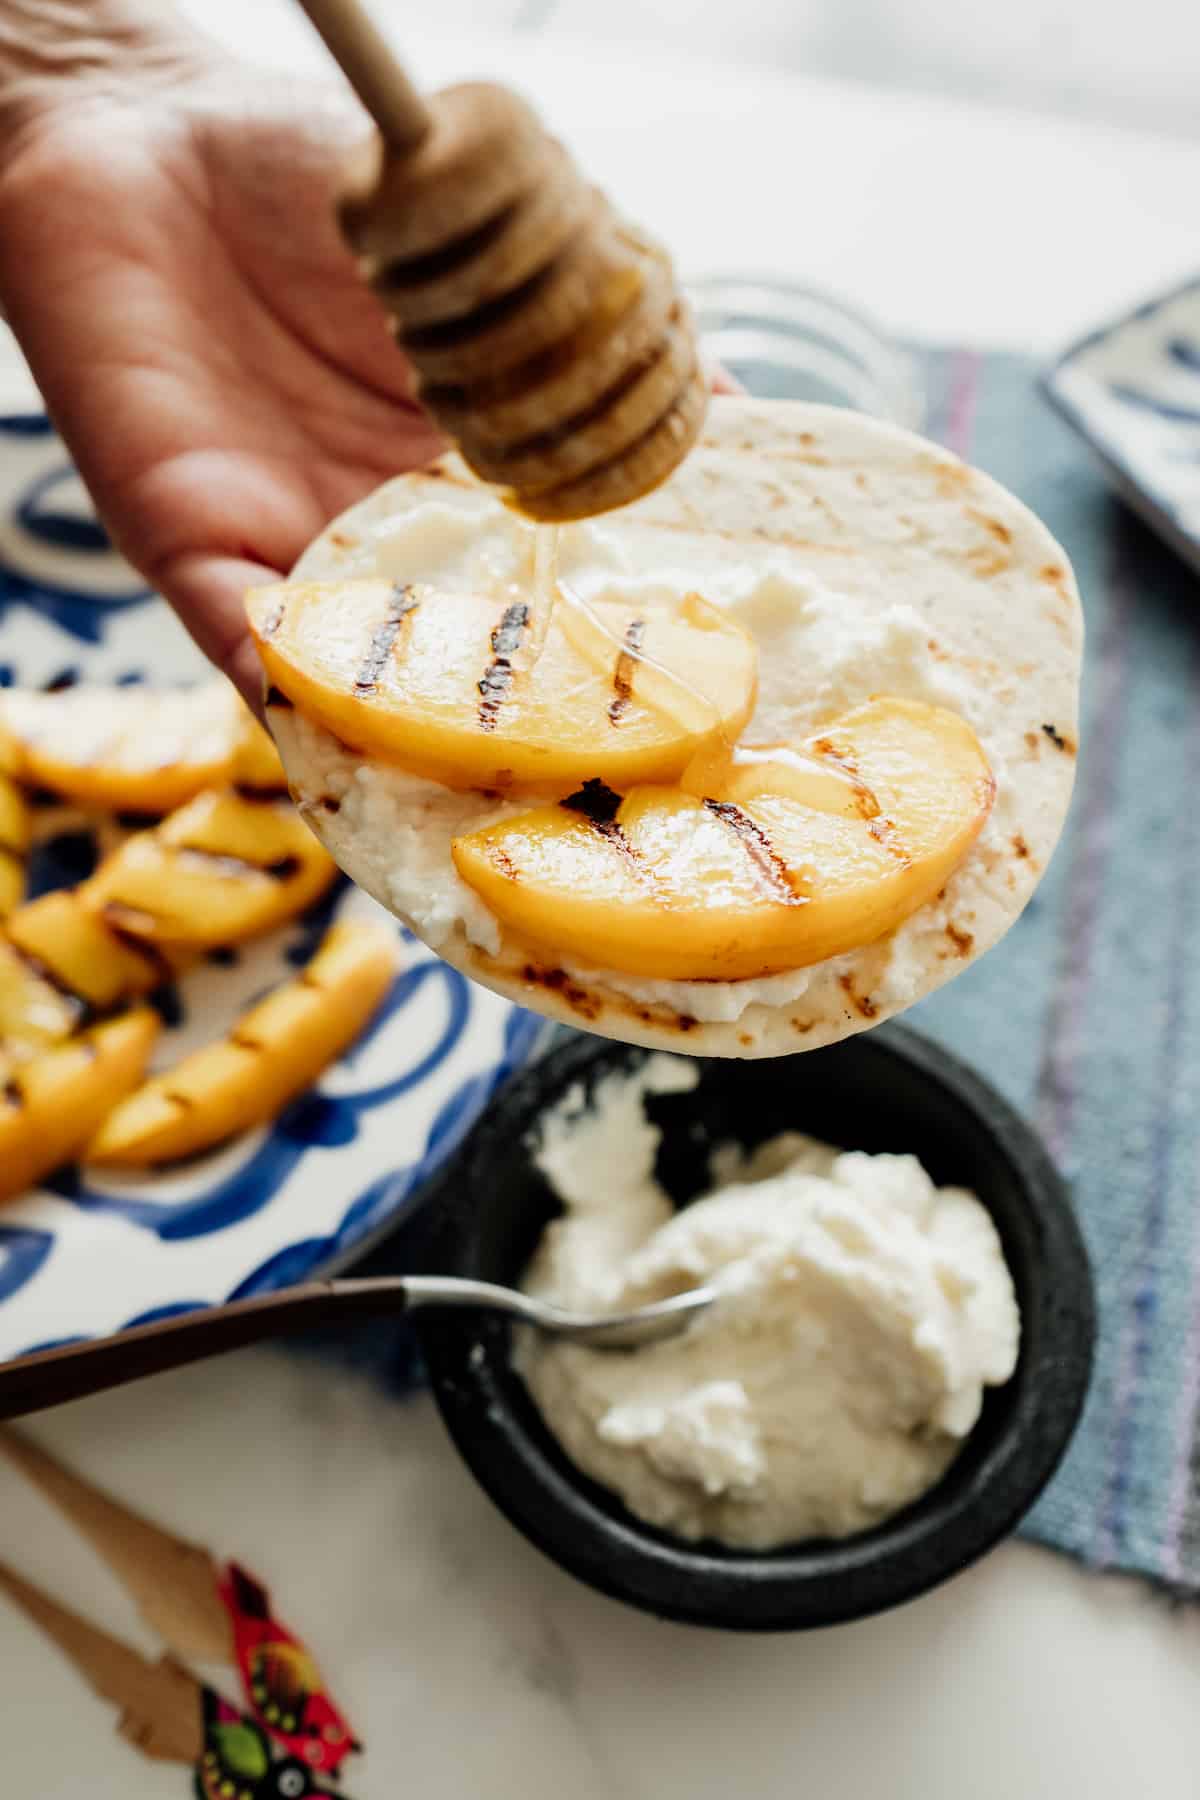 a hand holding a flour tortilla smothered with ricotta and grilled peaches drizzling honey on top. A side of plate with additional grilled peaches